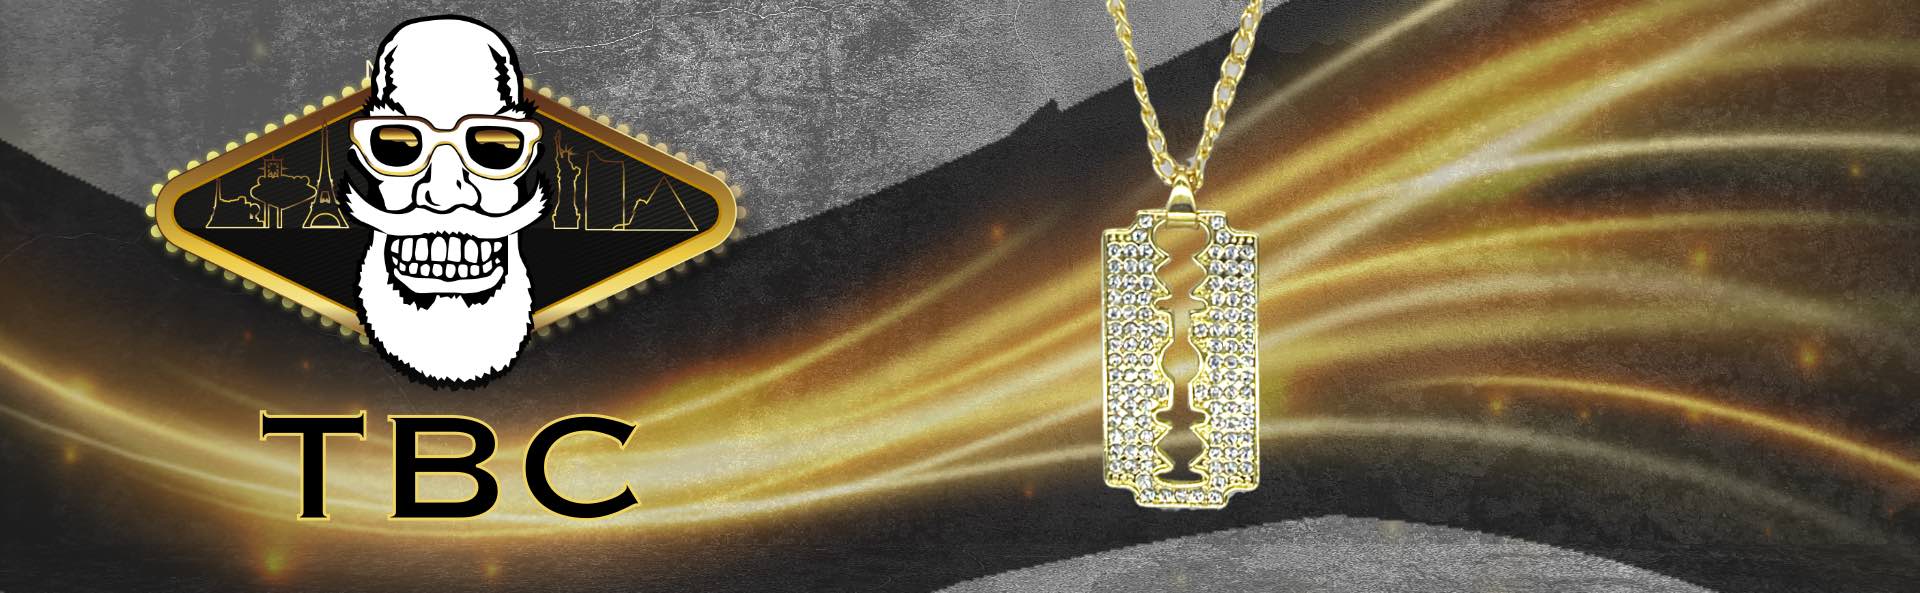 Gold Spark Barber Blade Necklace by The Barber Company, featuring a stainless steel barber blade charm on a sleek chain.